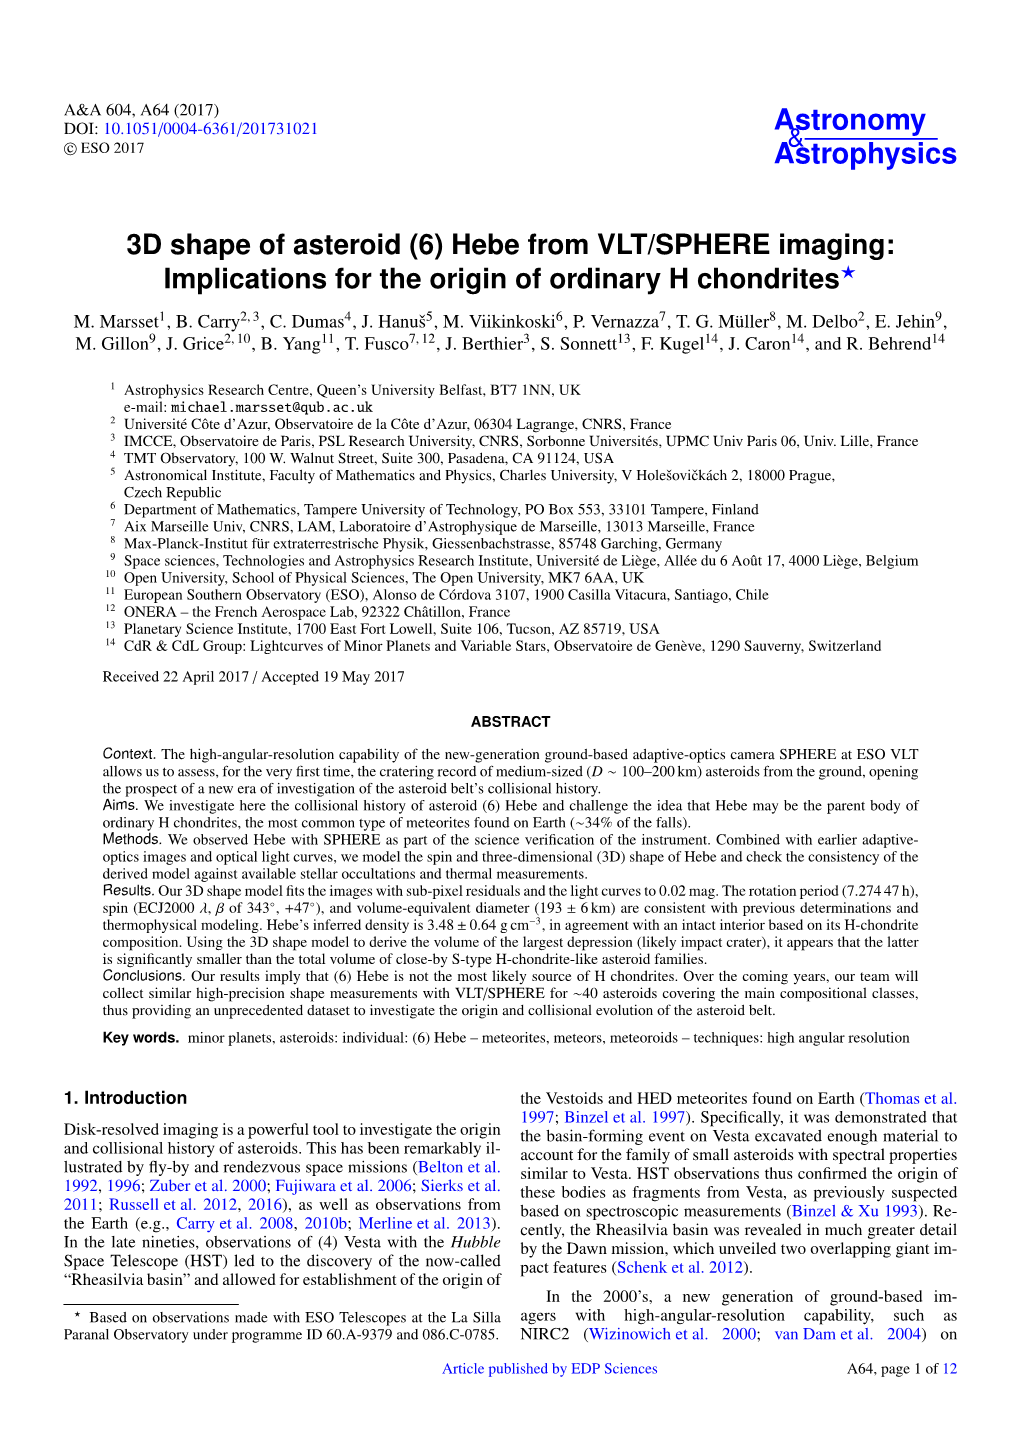 3D Shape of Asteroid (6) Hebe from VLT/SPHERE Imaging: Implications for the Origin of Ordinary H Chondrites?